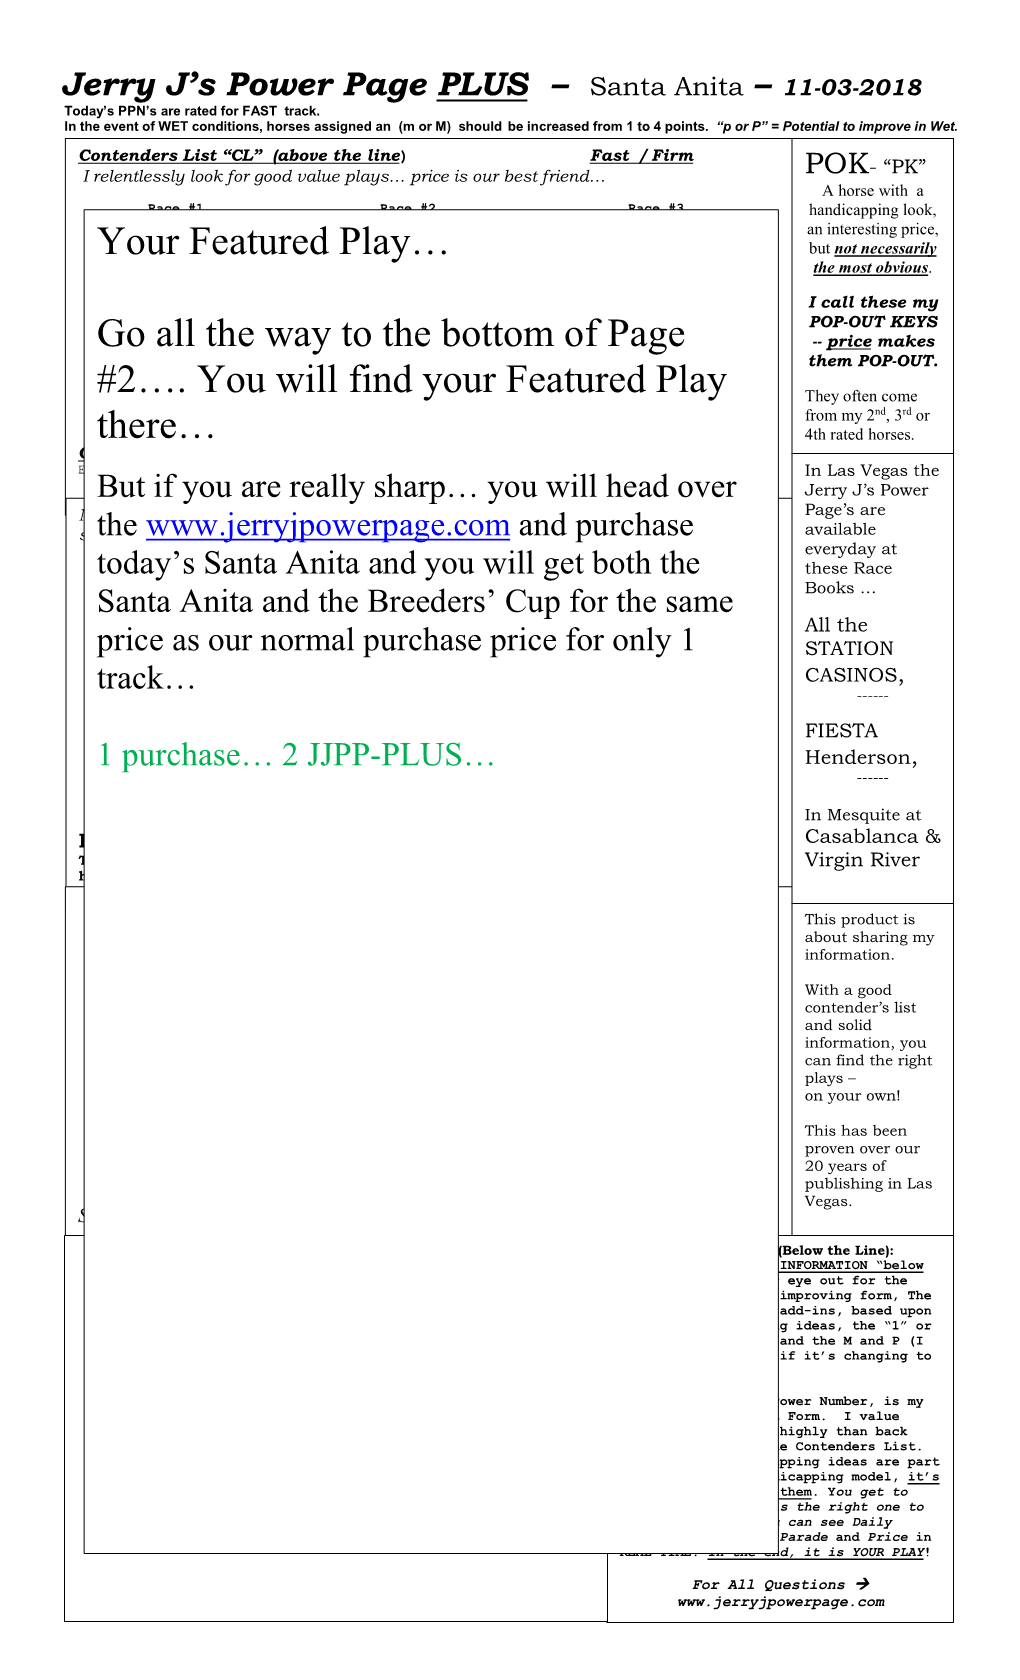 Your Featured Play… Go All the Way to the Bottom of Page #2…